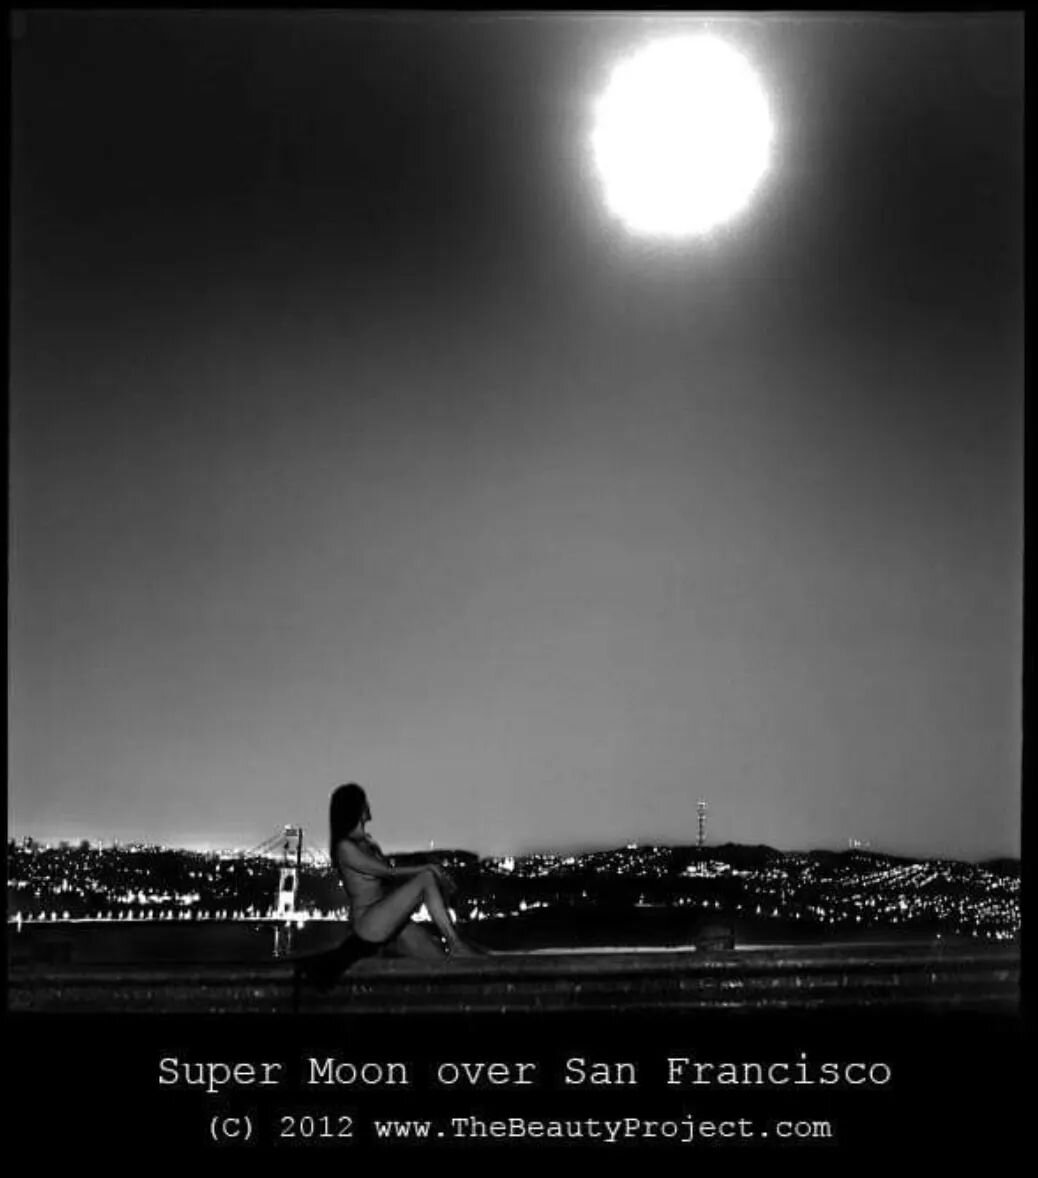 July 3, 2023 is another Super Moon!!! Who wants to shoot??
Message me!